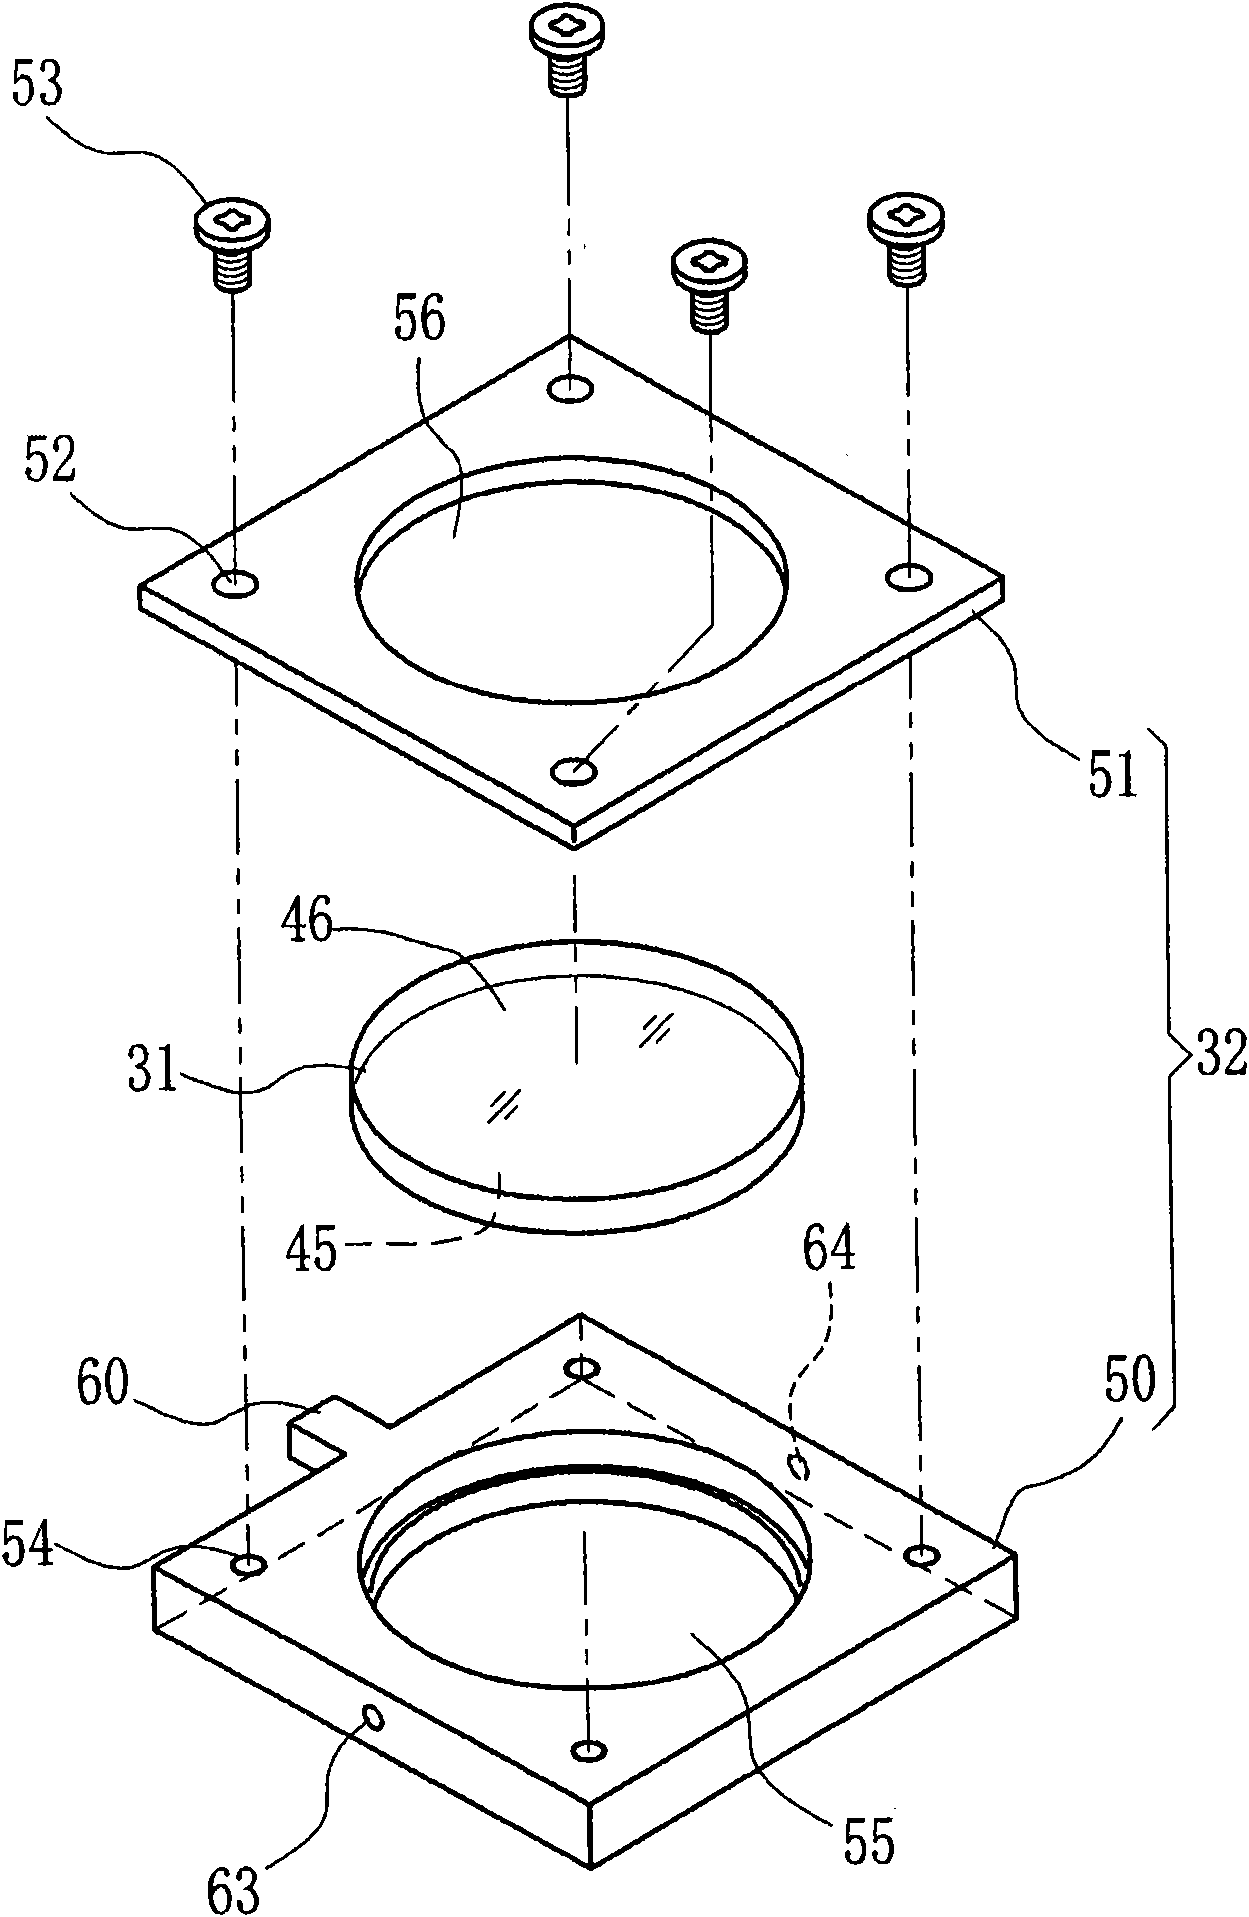 Workpiece turnover unit, vacuum film-forming device and workpiece assembly unit